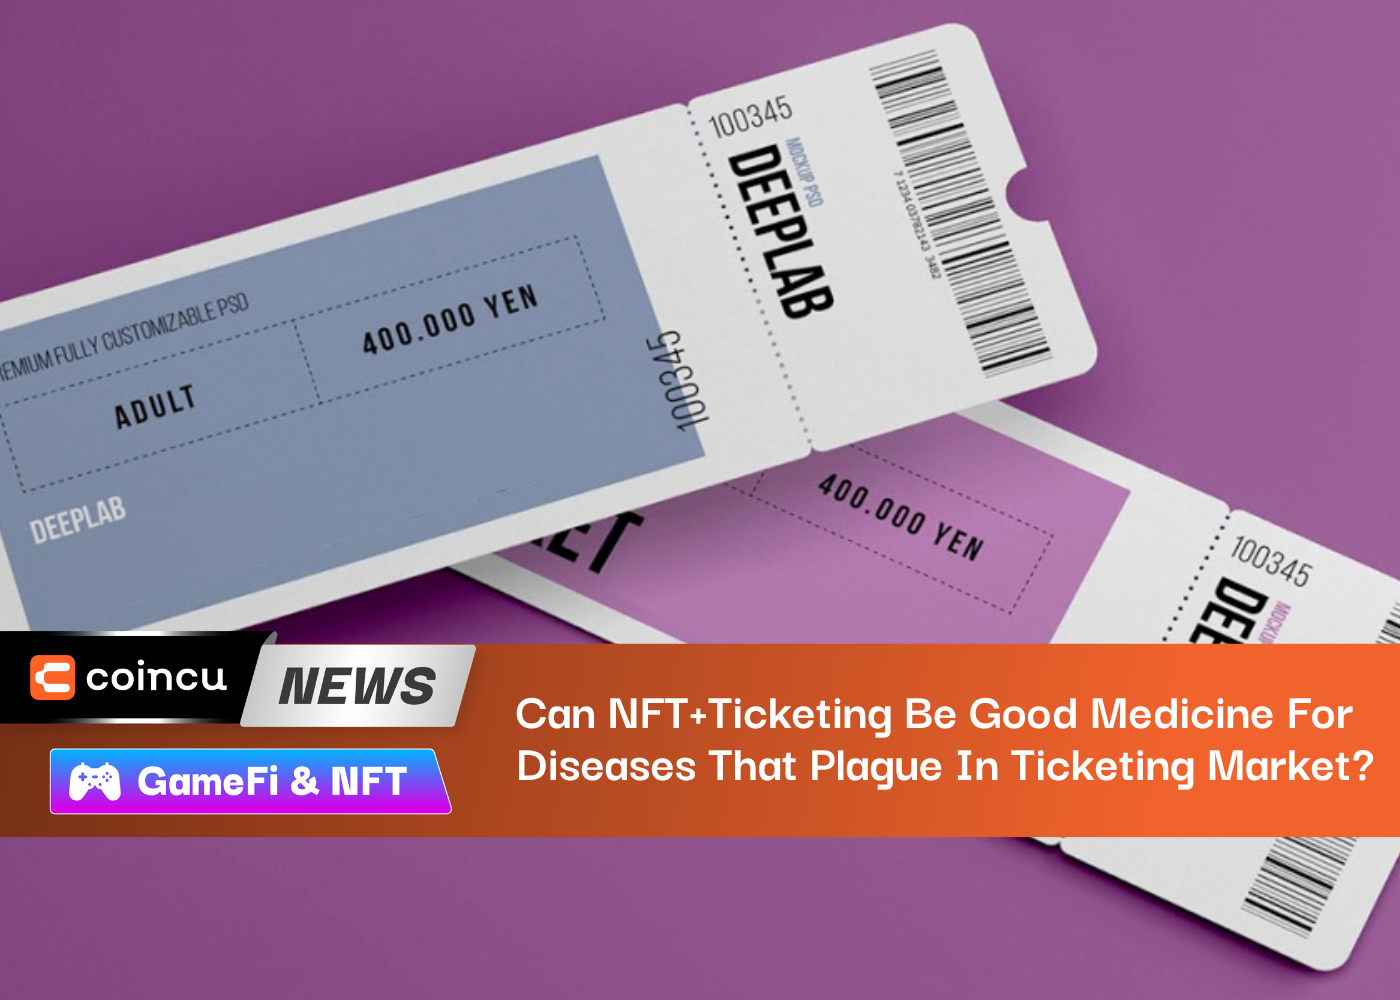 Can NFT+Ticketing Be Good Medicine For Diseases That Plague In Ticketing Market?